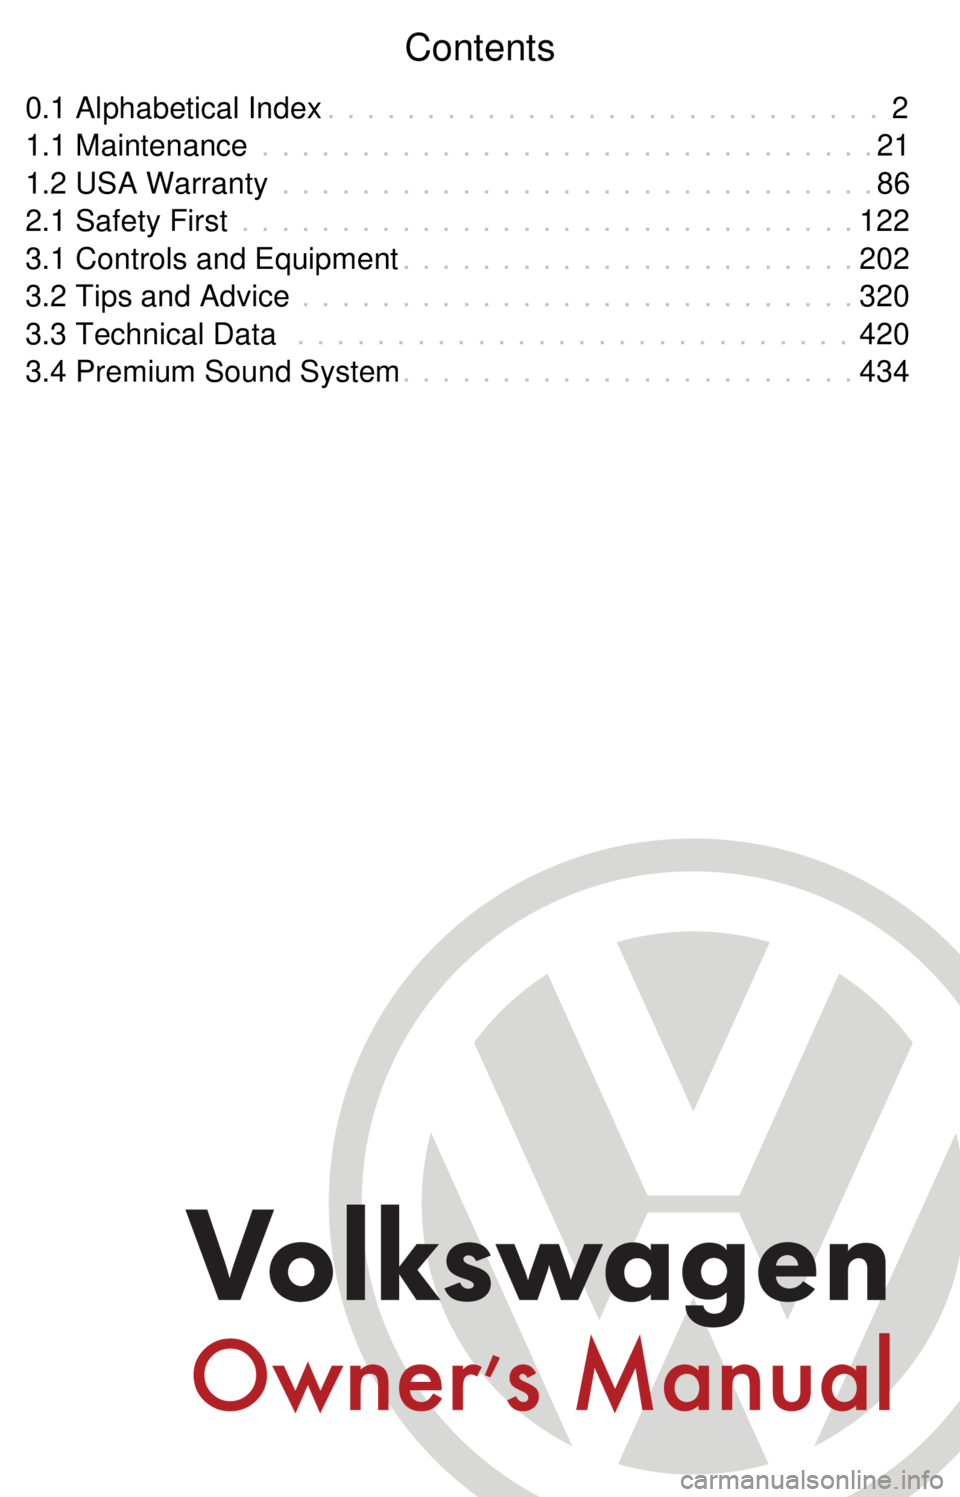 VOLKSWAGEN JETTA 2007  Owners Manual Contents
0.1 Alphabetical Index 2
. . . . . . . . . . . . . . . . . . . . . . . . . . . .
1.1 Maintenance 21
. . . . . . . . . . . . . . . . . . . . . . . . . . . . . . .
1.2 USA Warranty 86
. . . . .